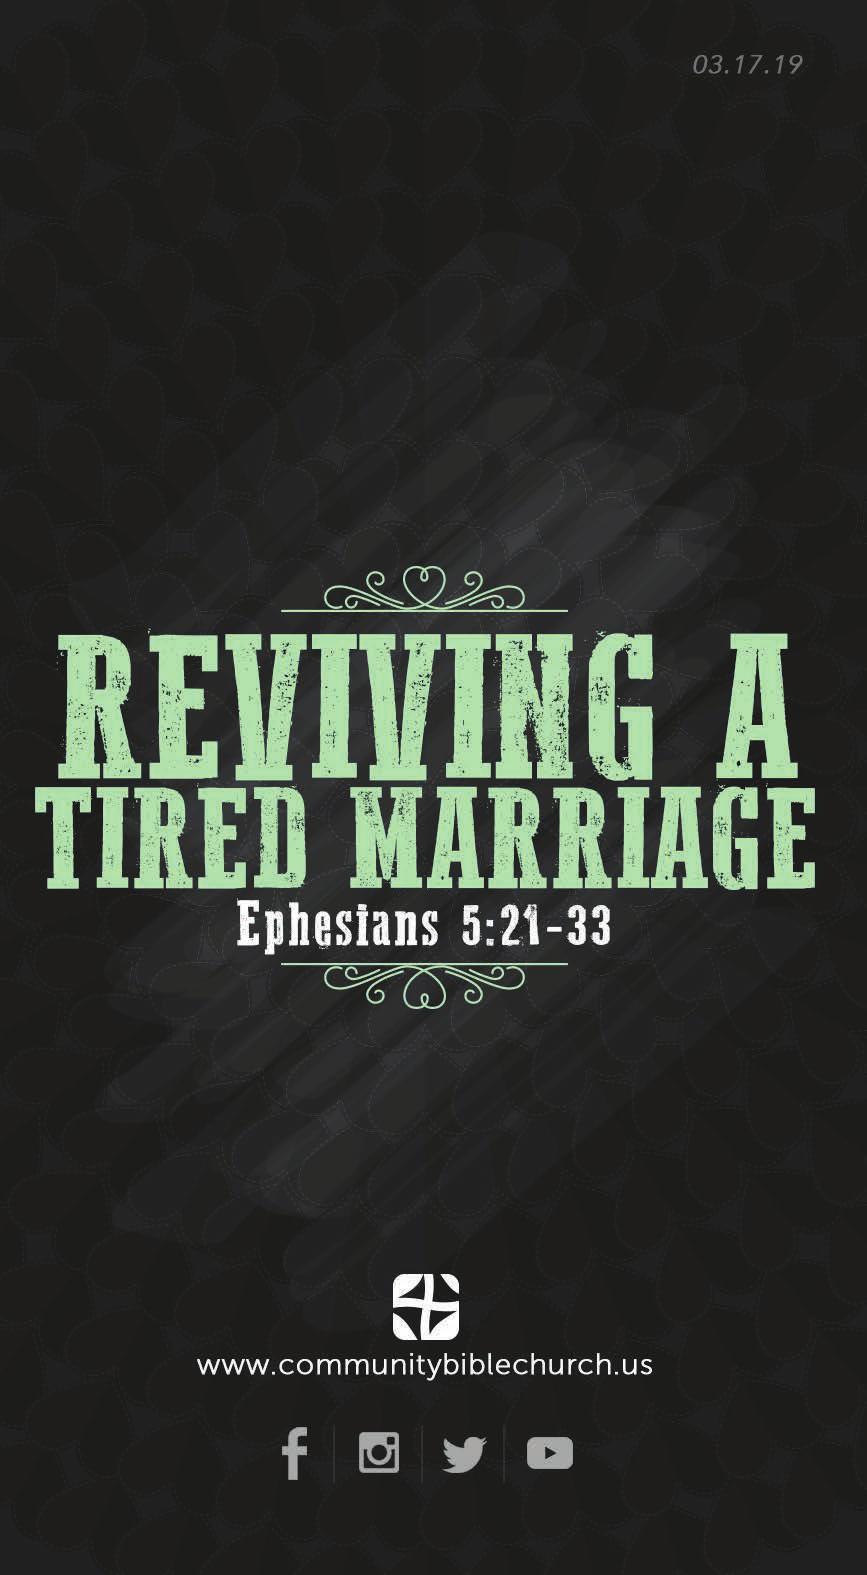 Introduction Reviving A Tired Marriage Ephesians 5:21-33 If you are not currently attending an ABF class, WHY NOT TRY the new class for 30s and 40s?